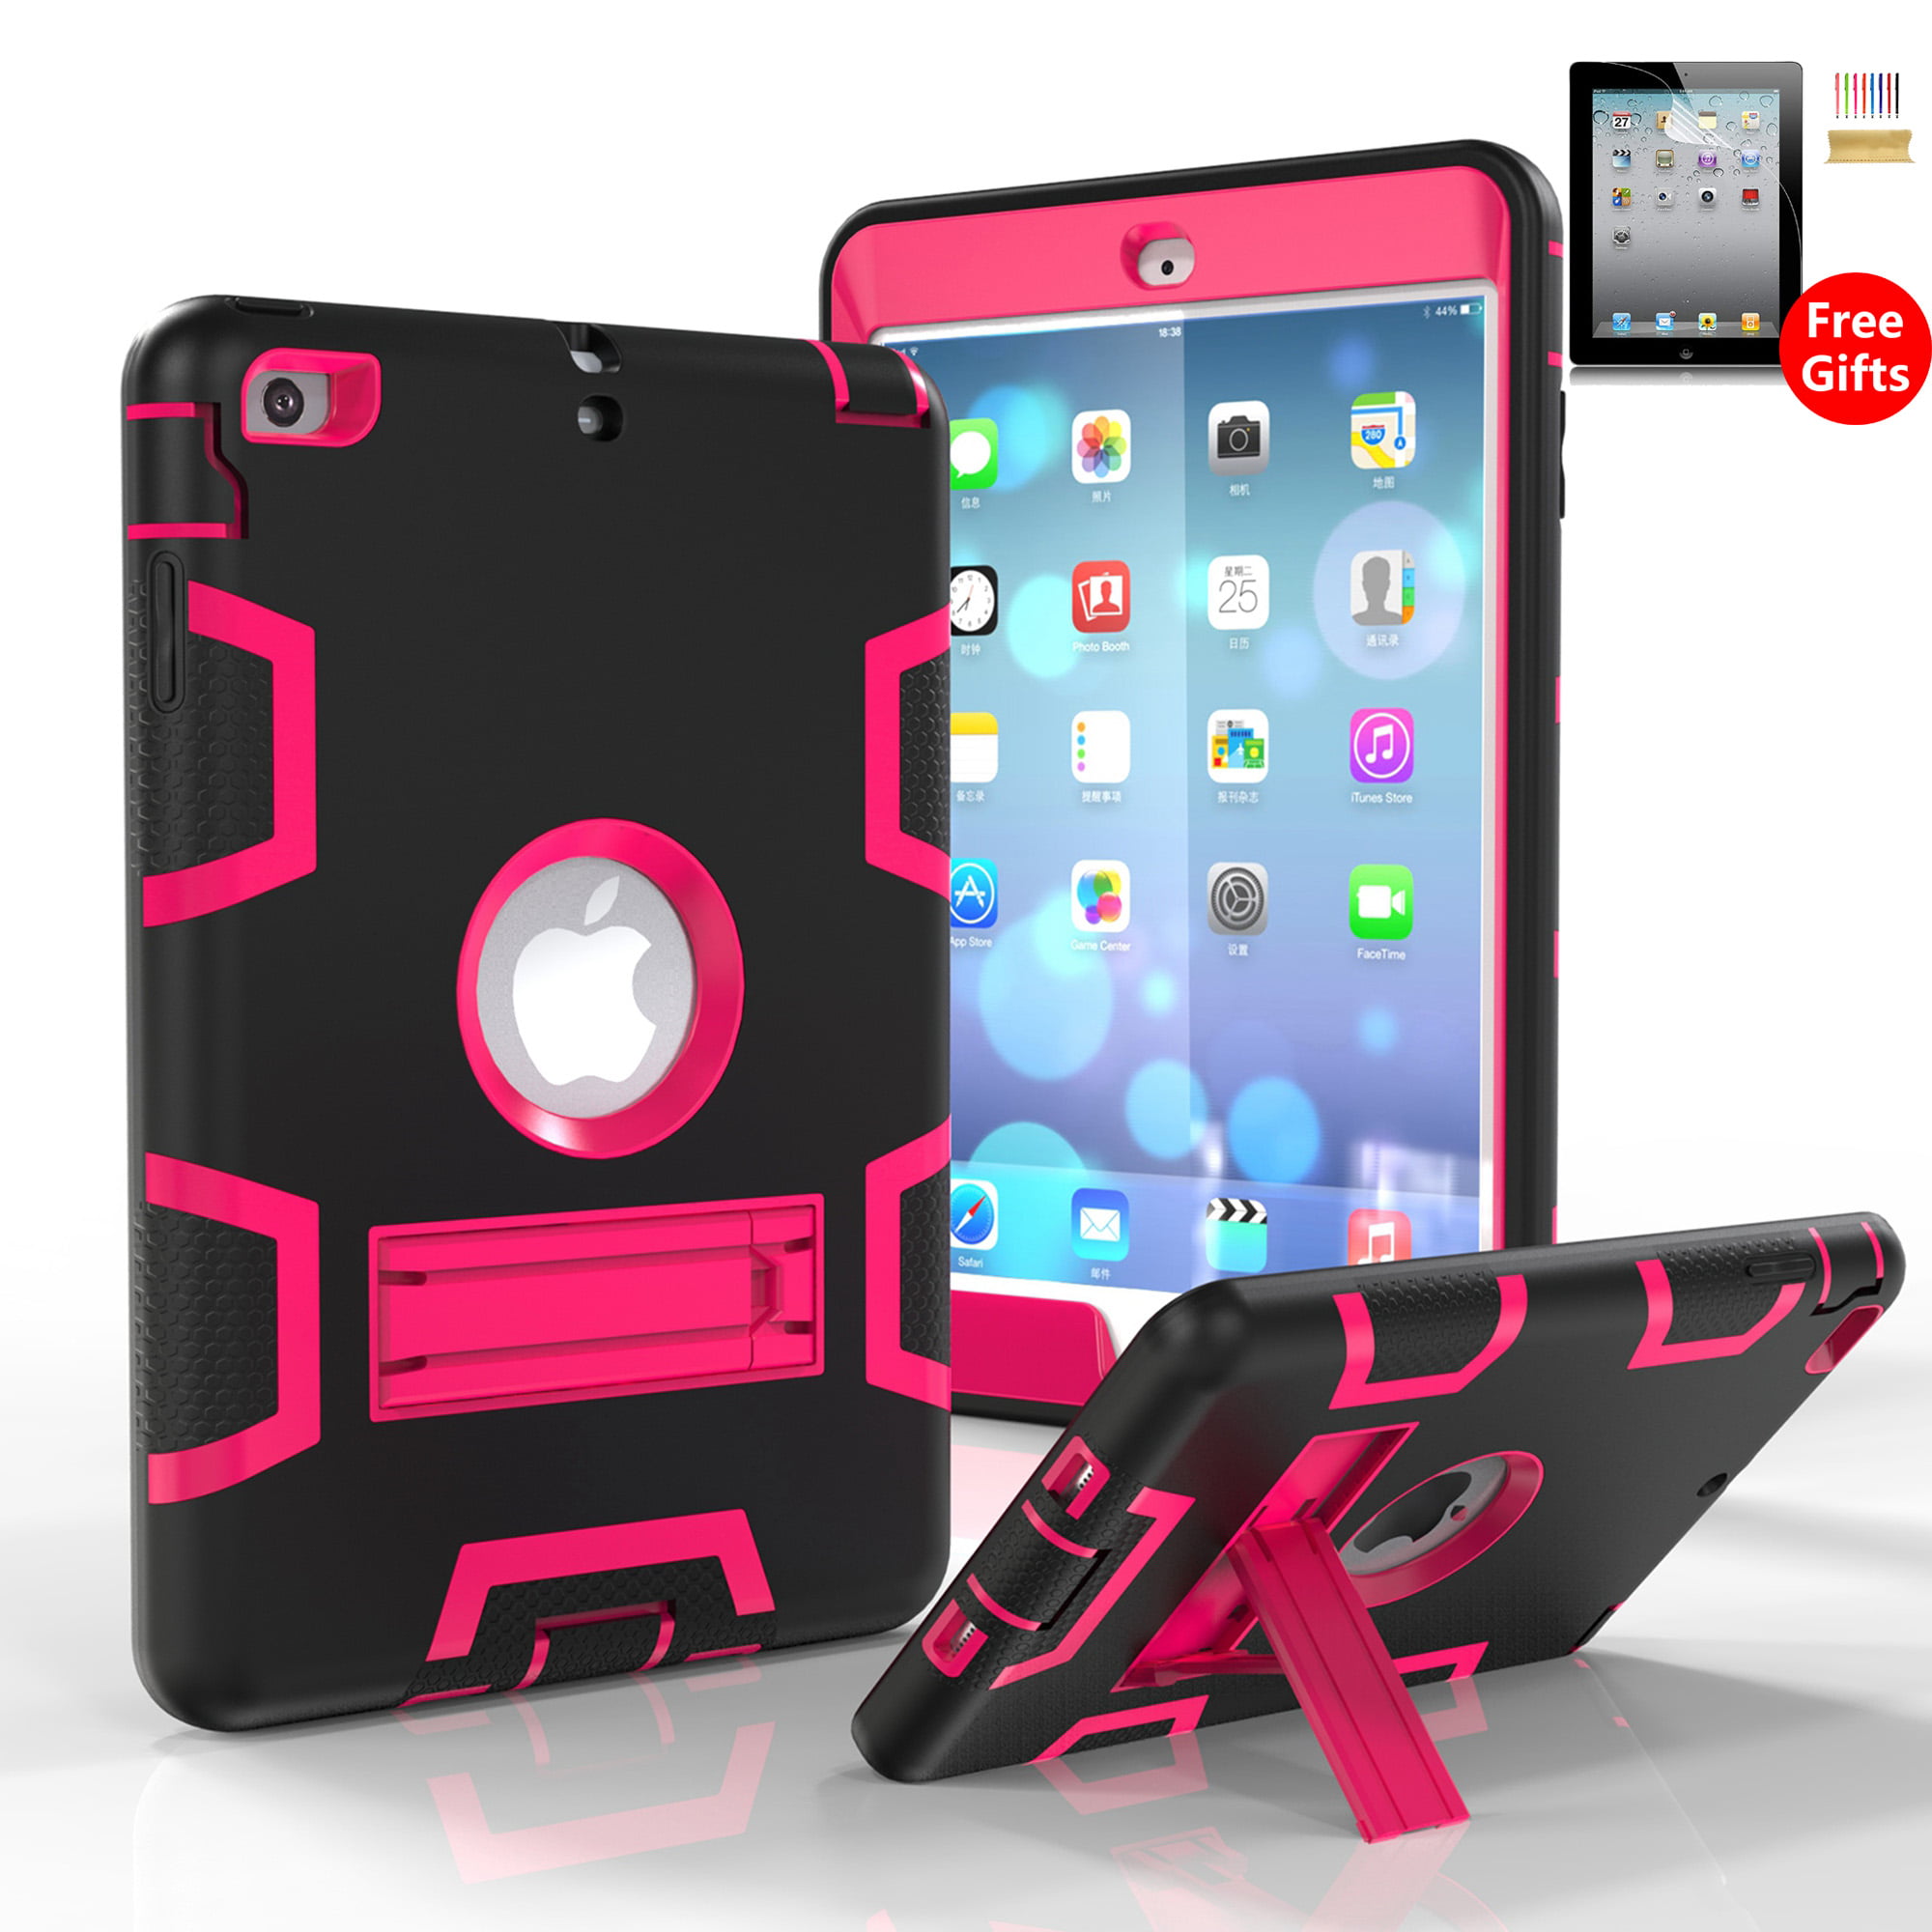 iPad mini 1 2 3 Case For Kids, Dteck Shockproof Three Layer Protective